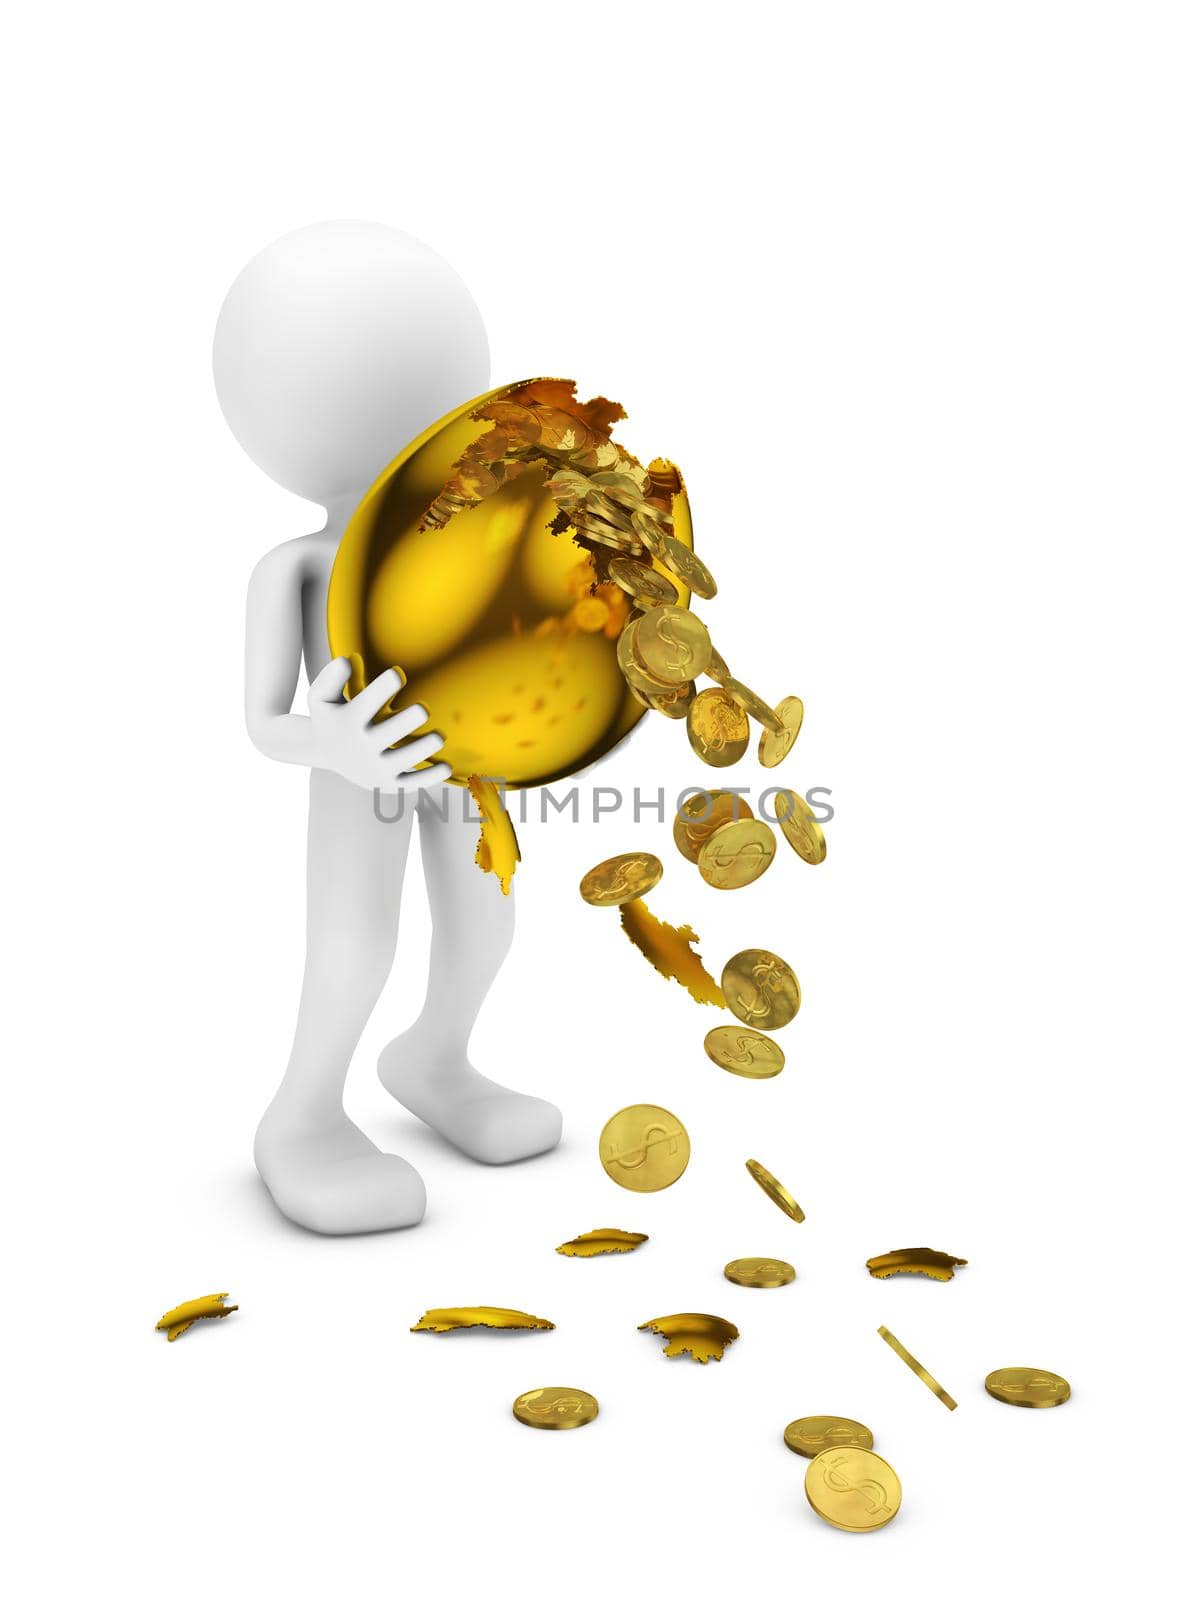 man scatters gold coins from a golden egg